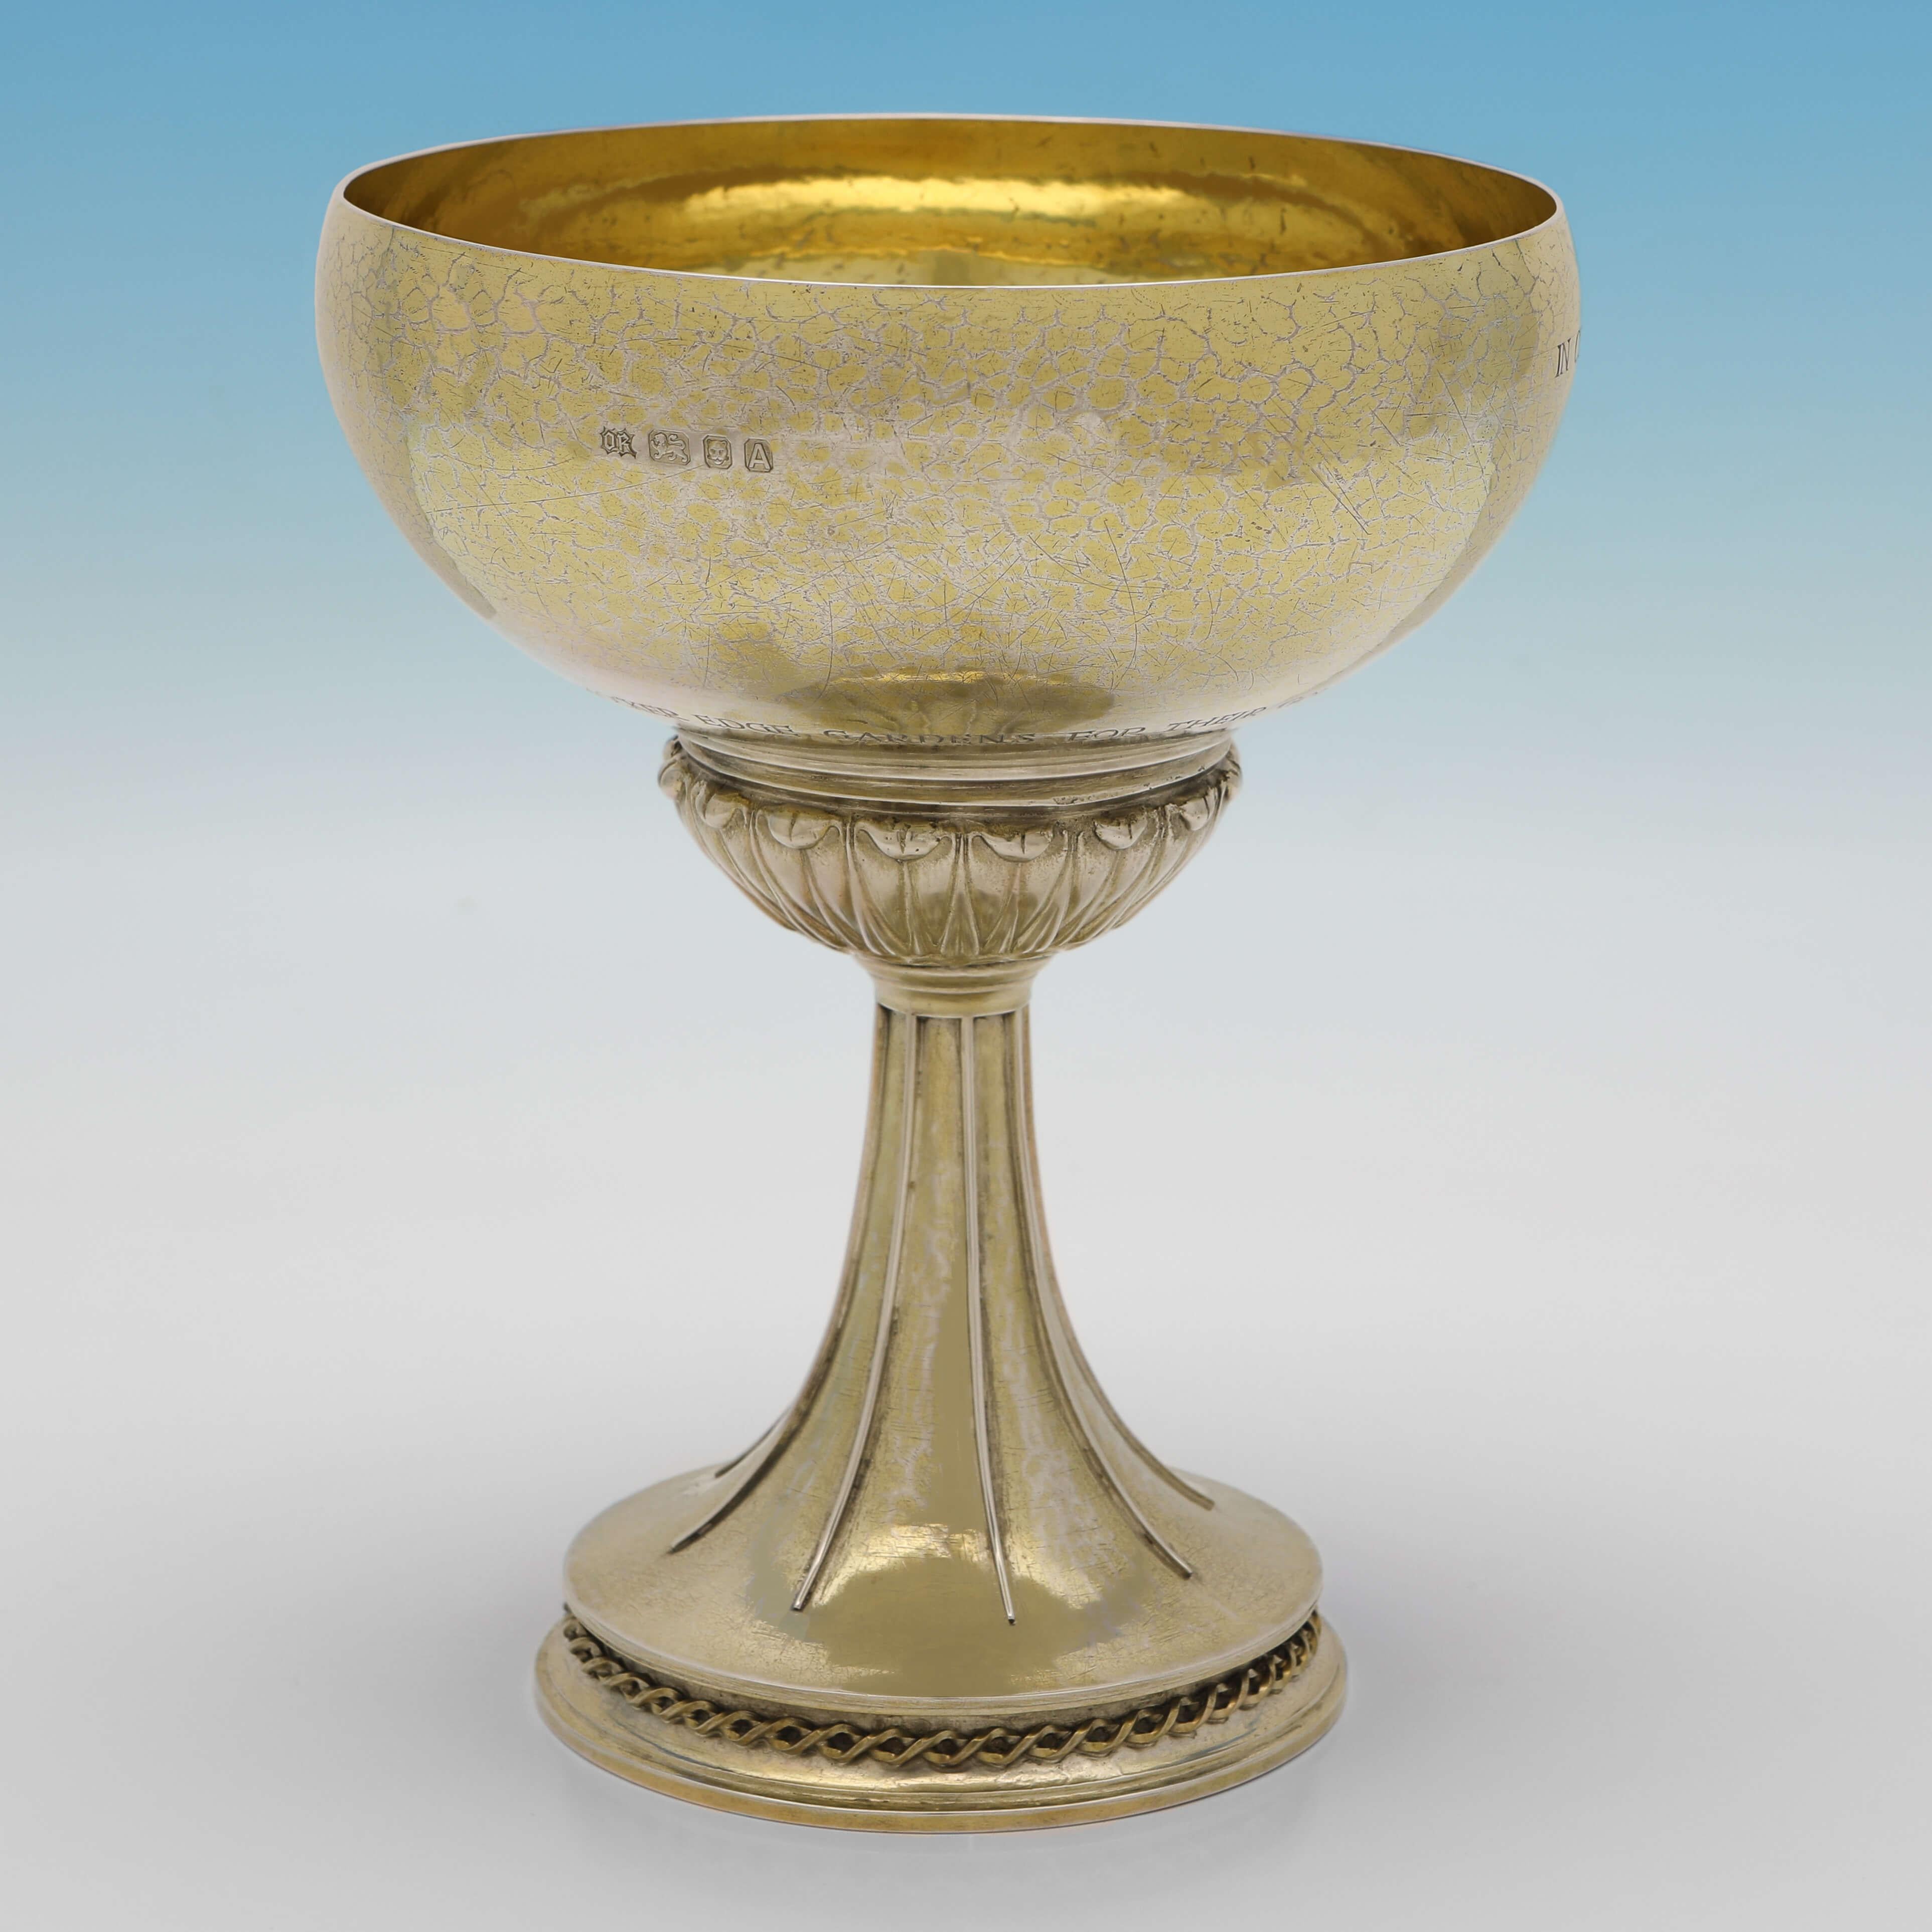 Hallmarked in London in 1936 by Omar Ramsden, this wonderful, Sterling Silver Chalice, is in the Arts & Crafts taste, and features the original gilding and the cast and applied crest of the Royal Horticultural Society. 

The chalice was given as a